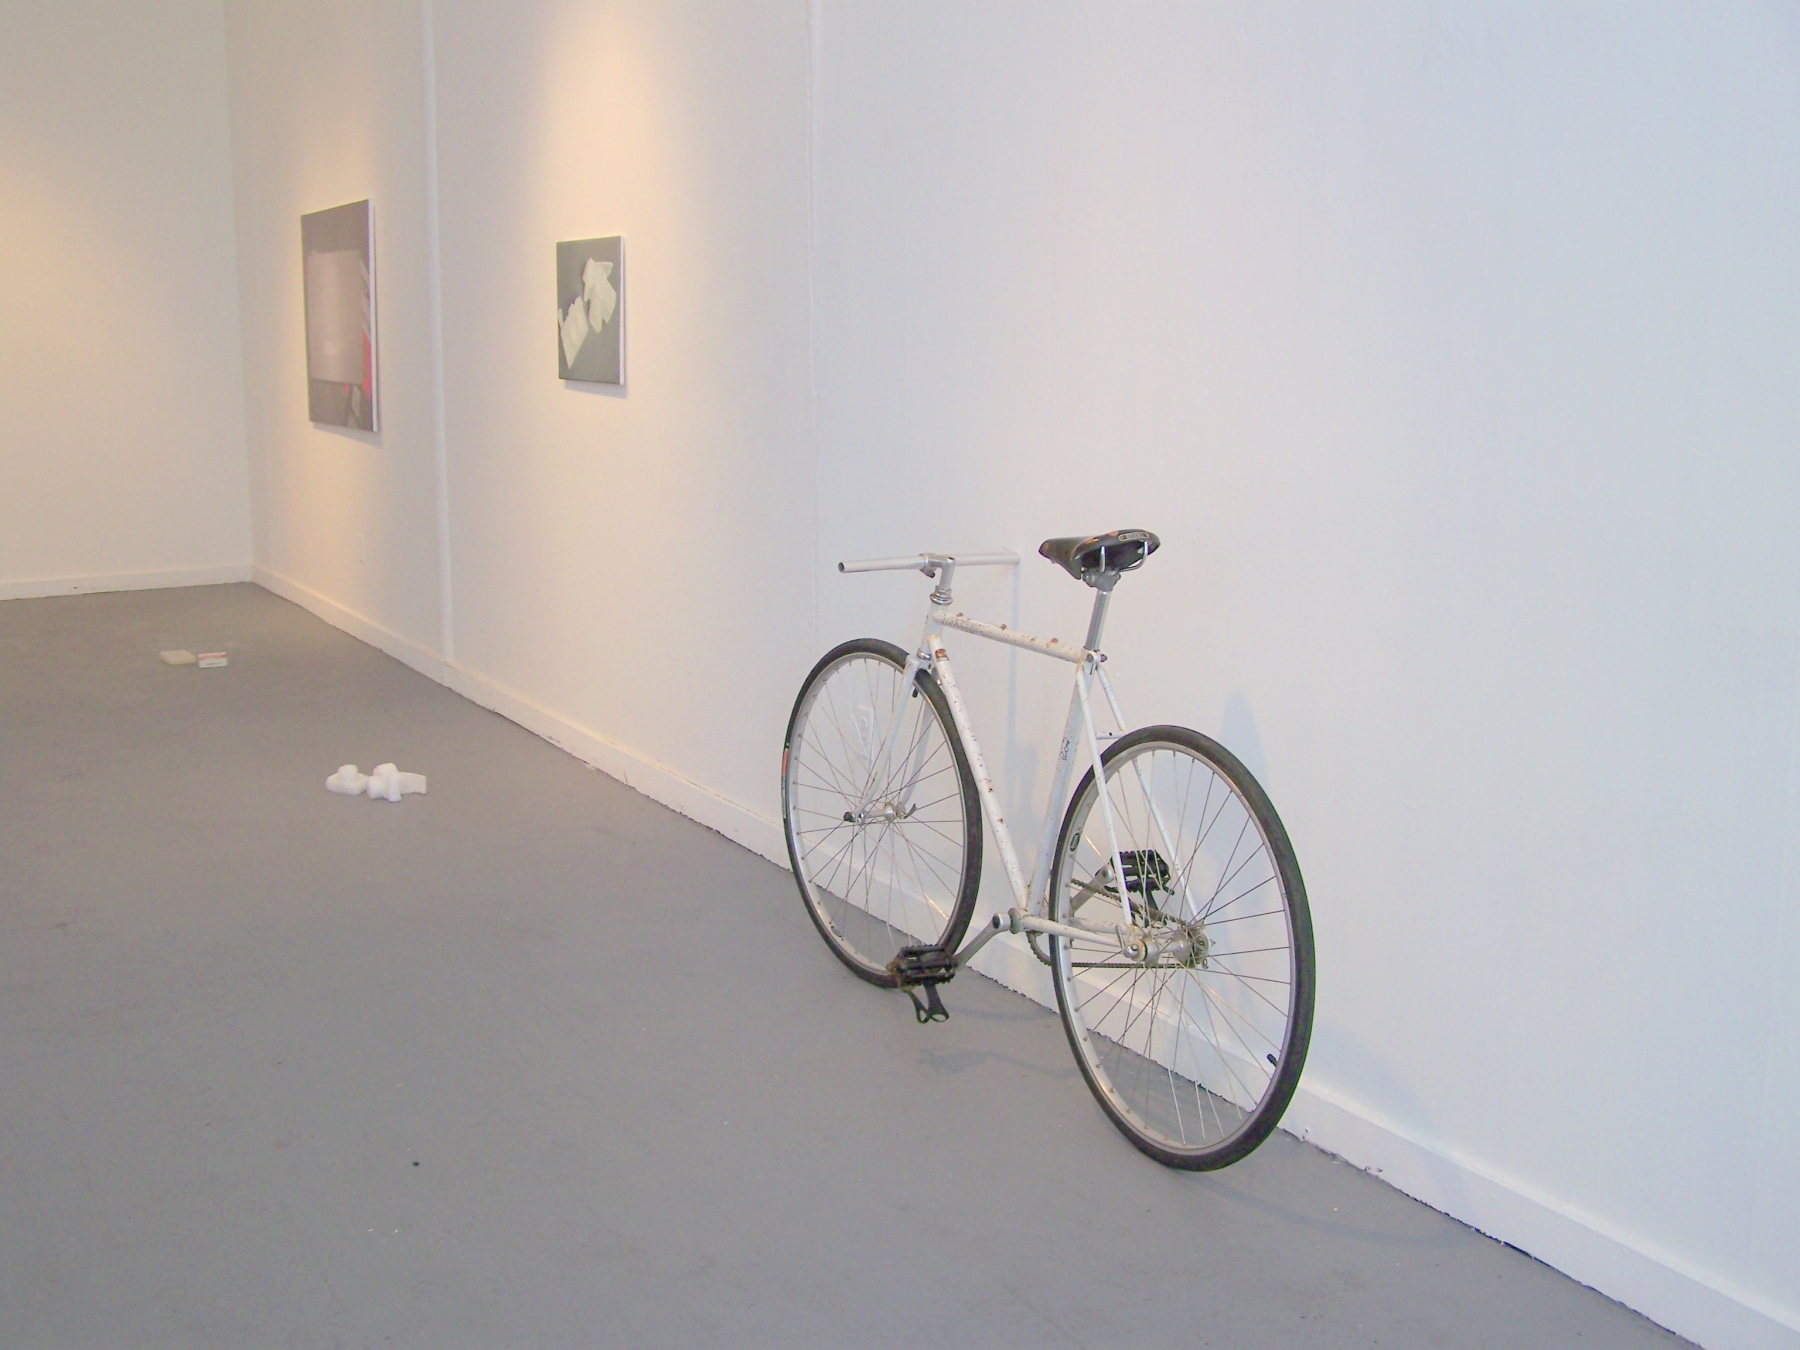 install featuring bicycle